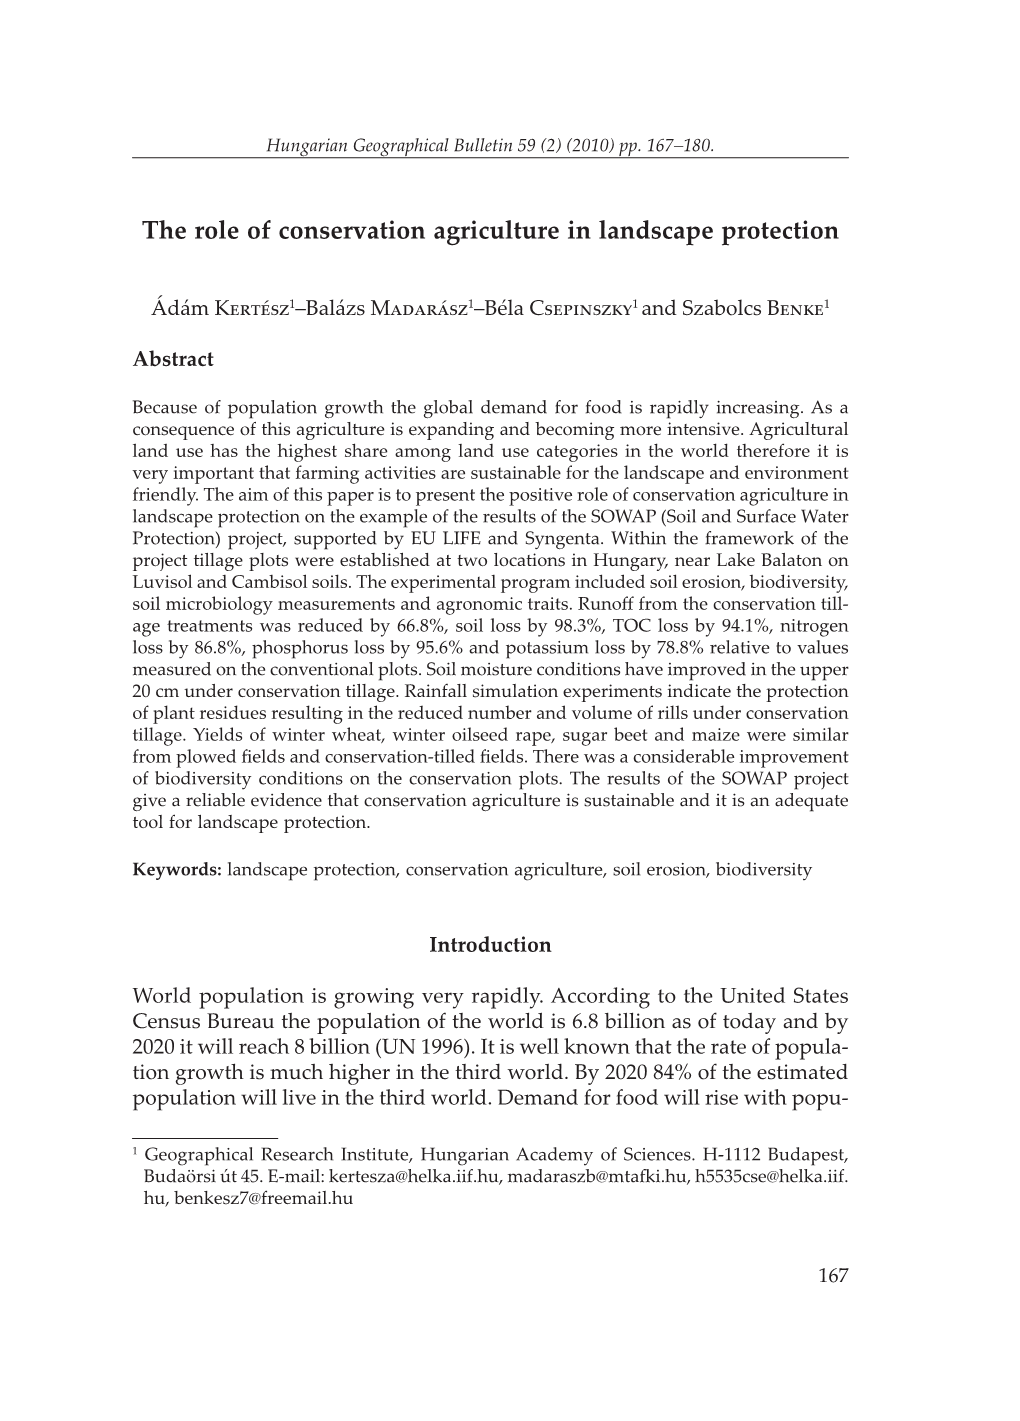 The Role of Conservation Agriculture in Landscape Protection